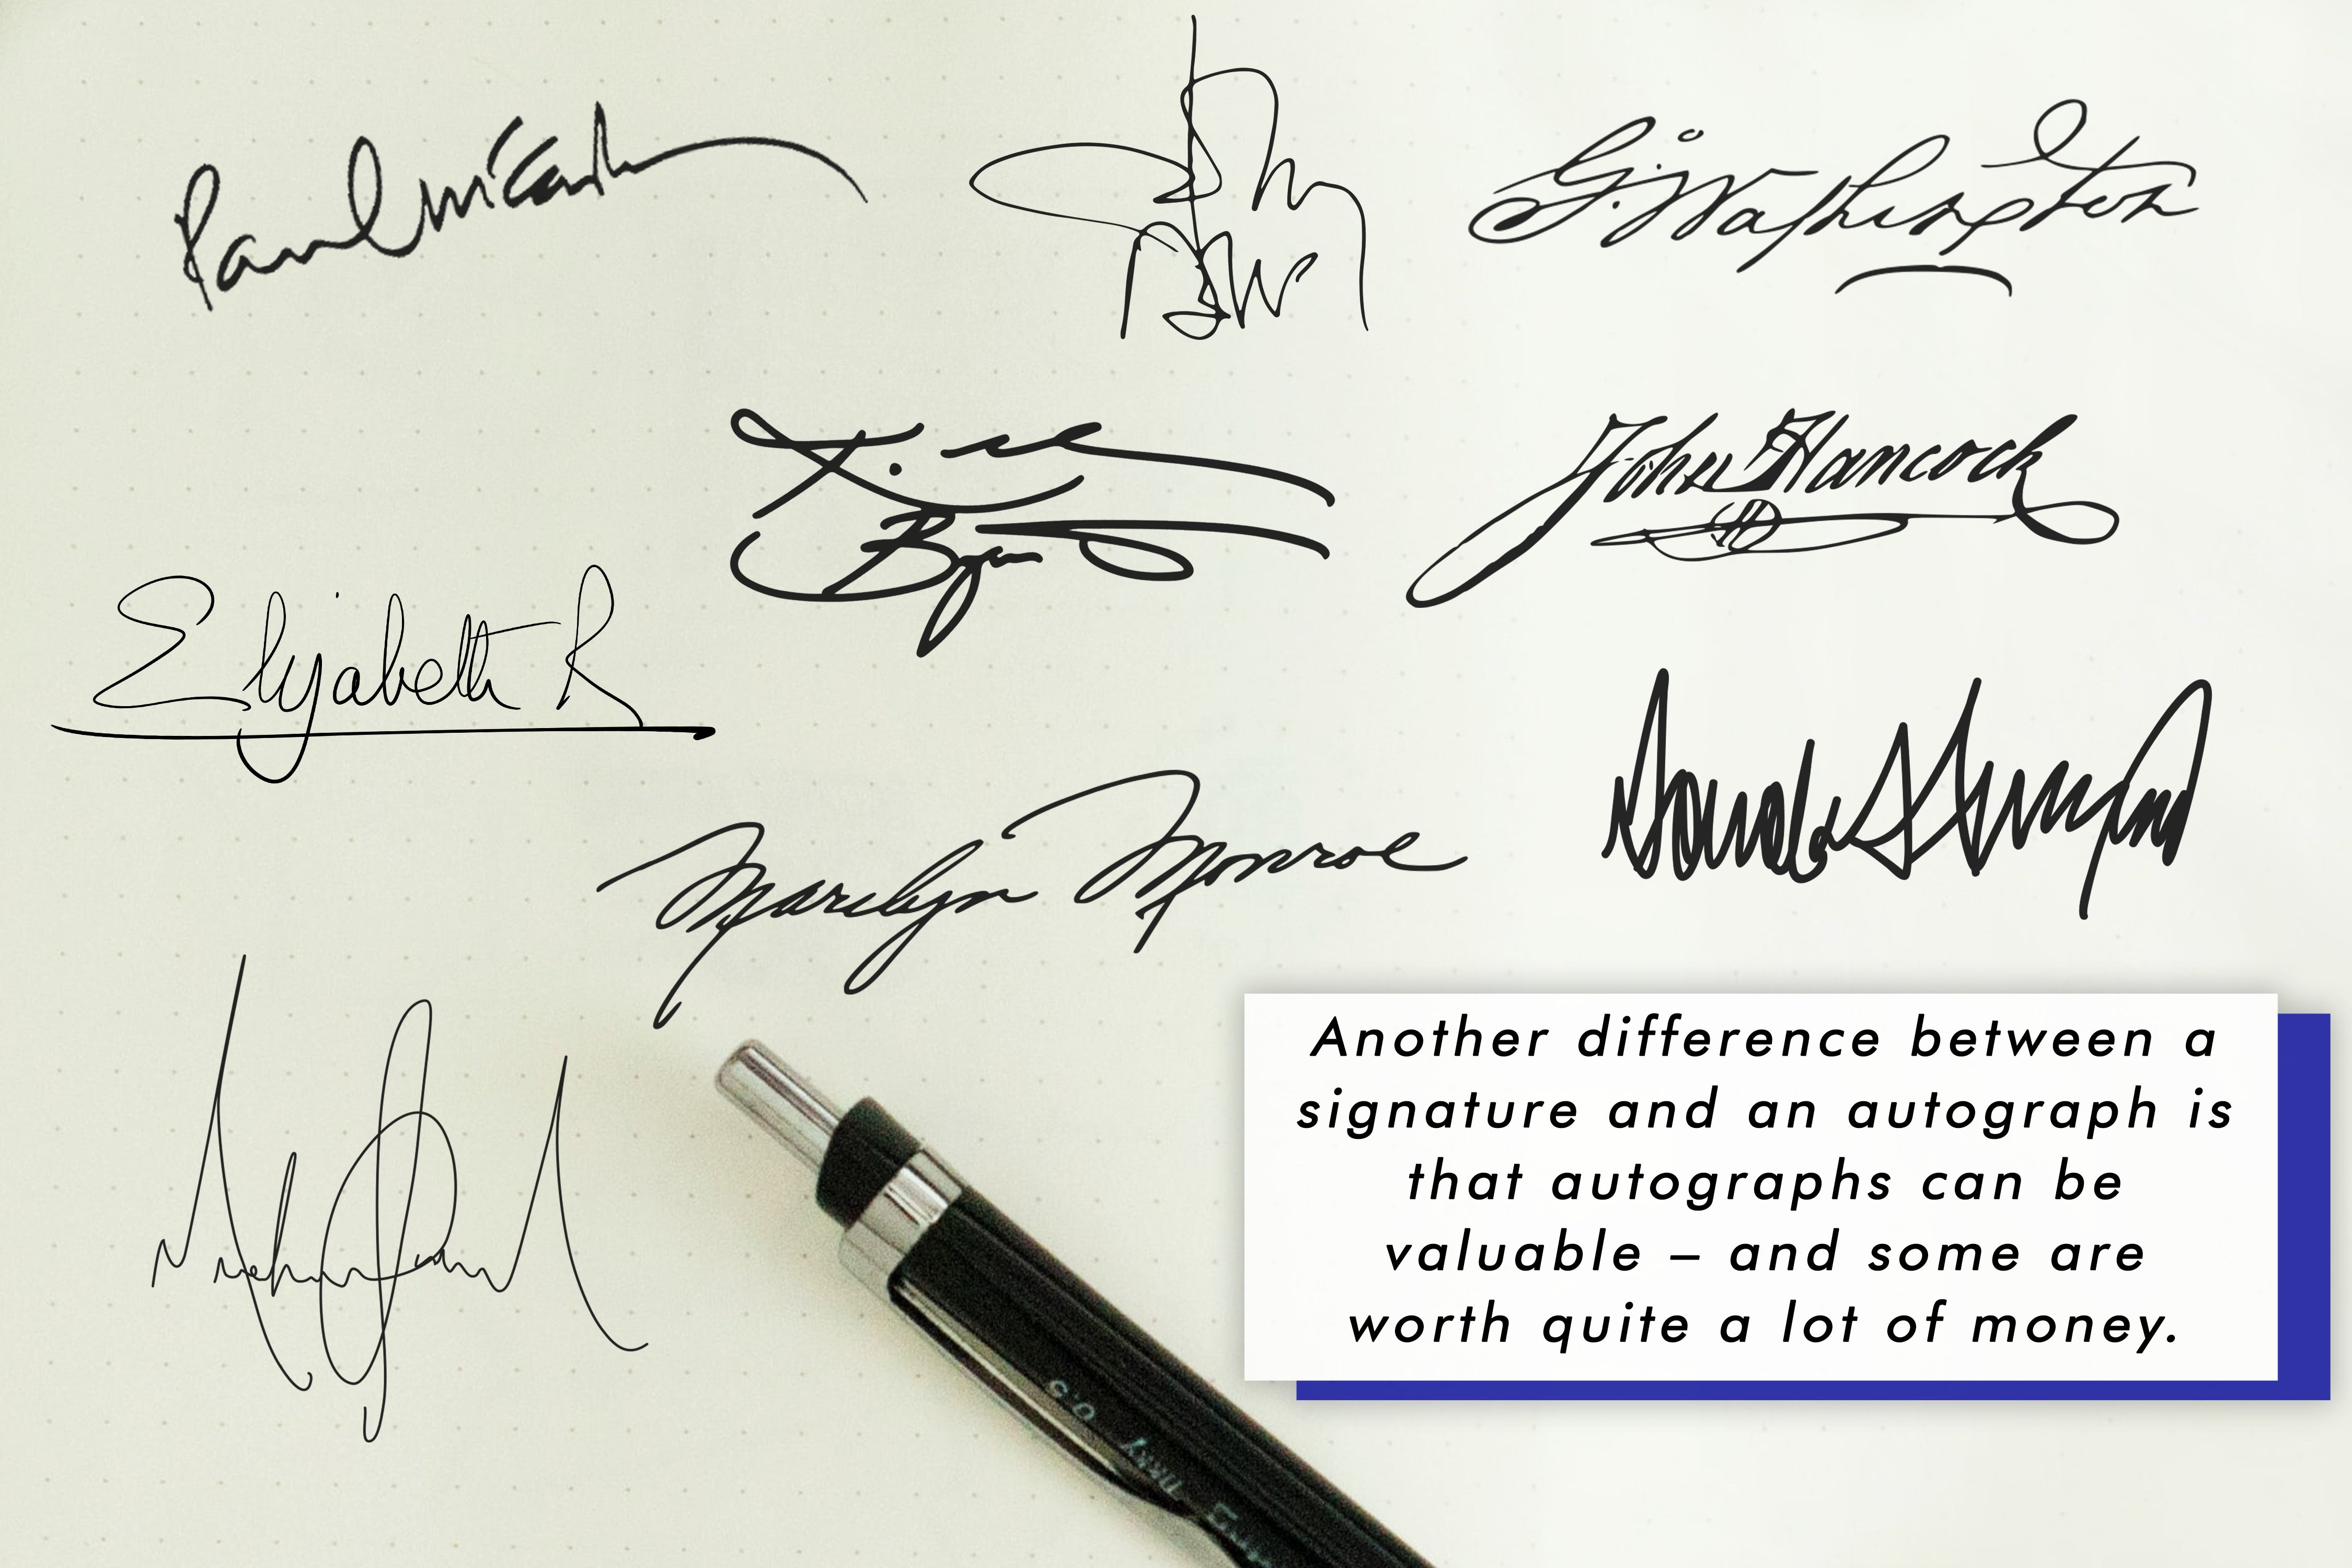 Another difference between a signature and an autograph is that autographs can be valuable – and some are worth quite a lot of money.